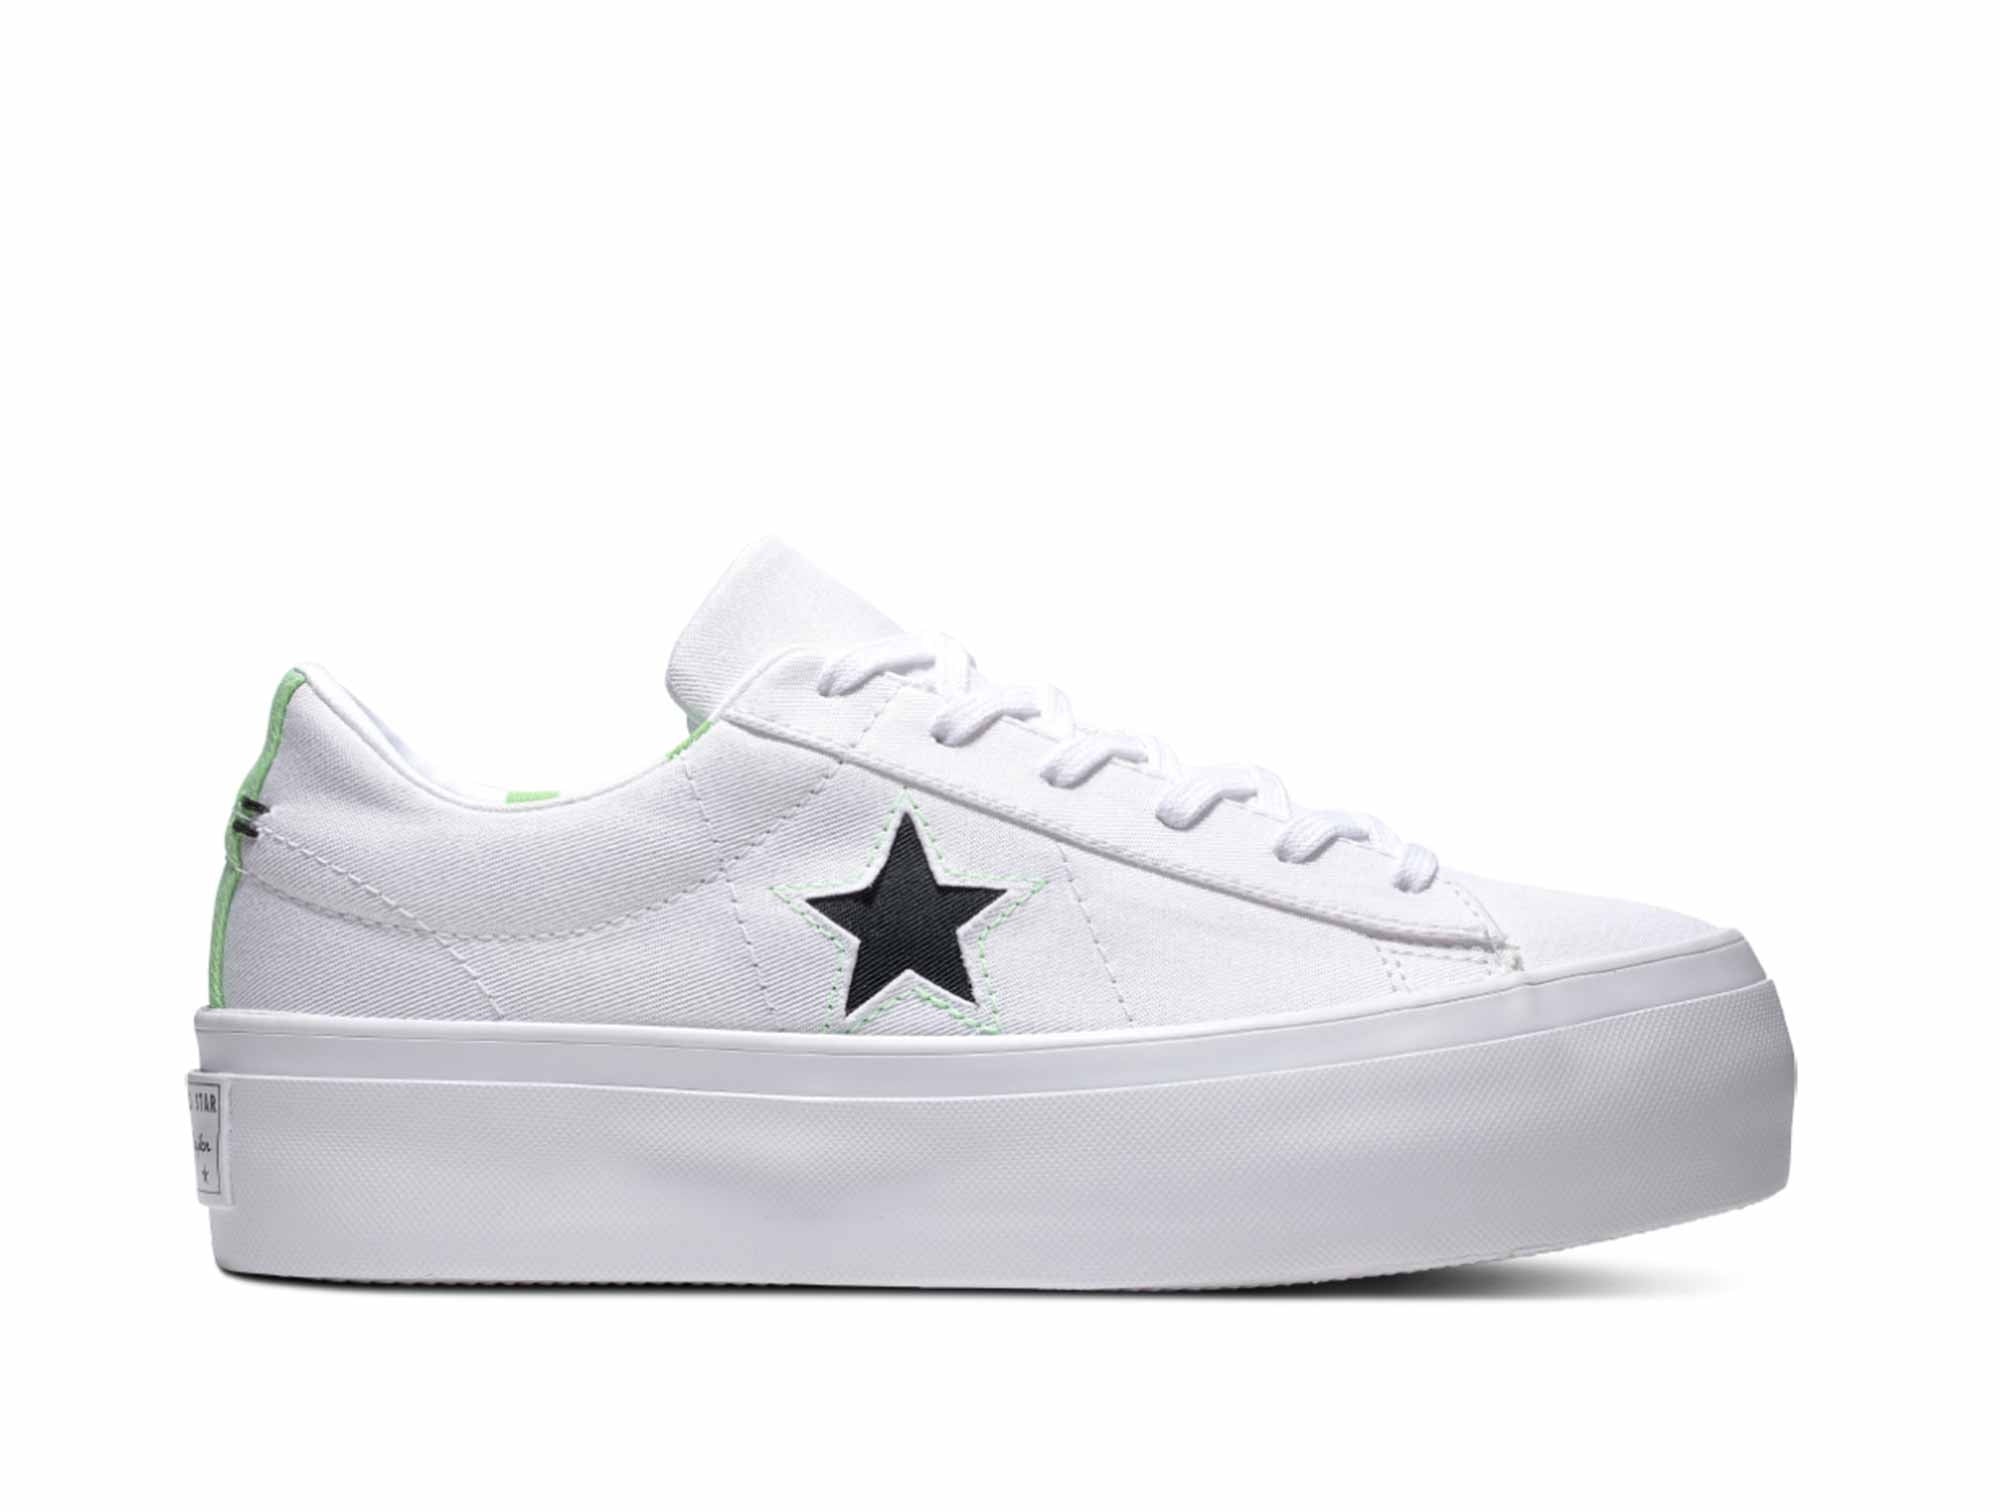 converse one star mujer